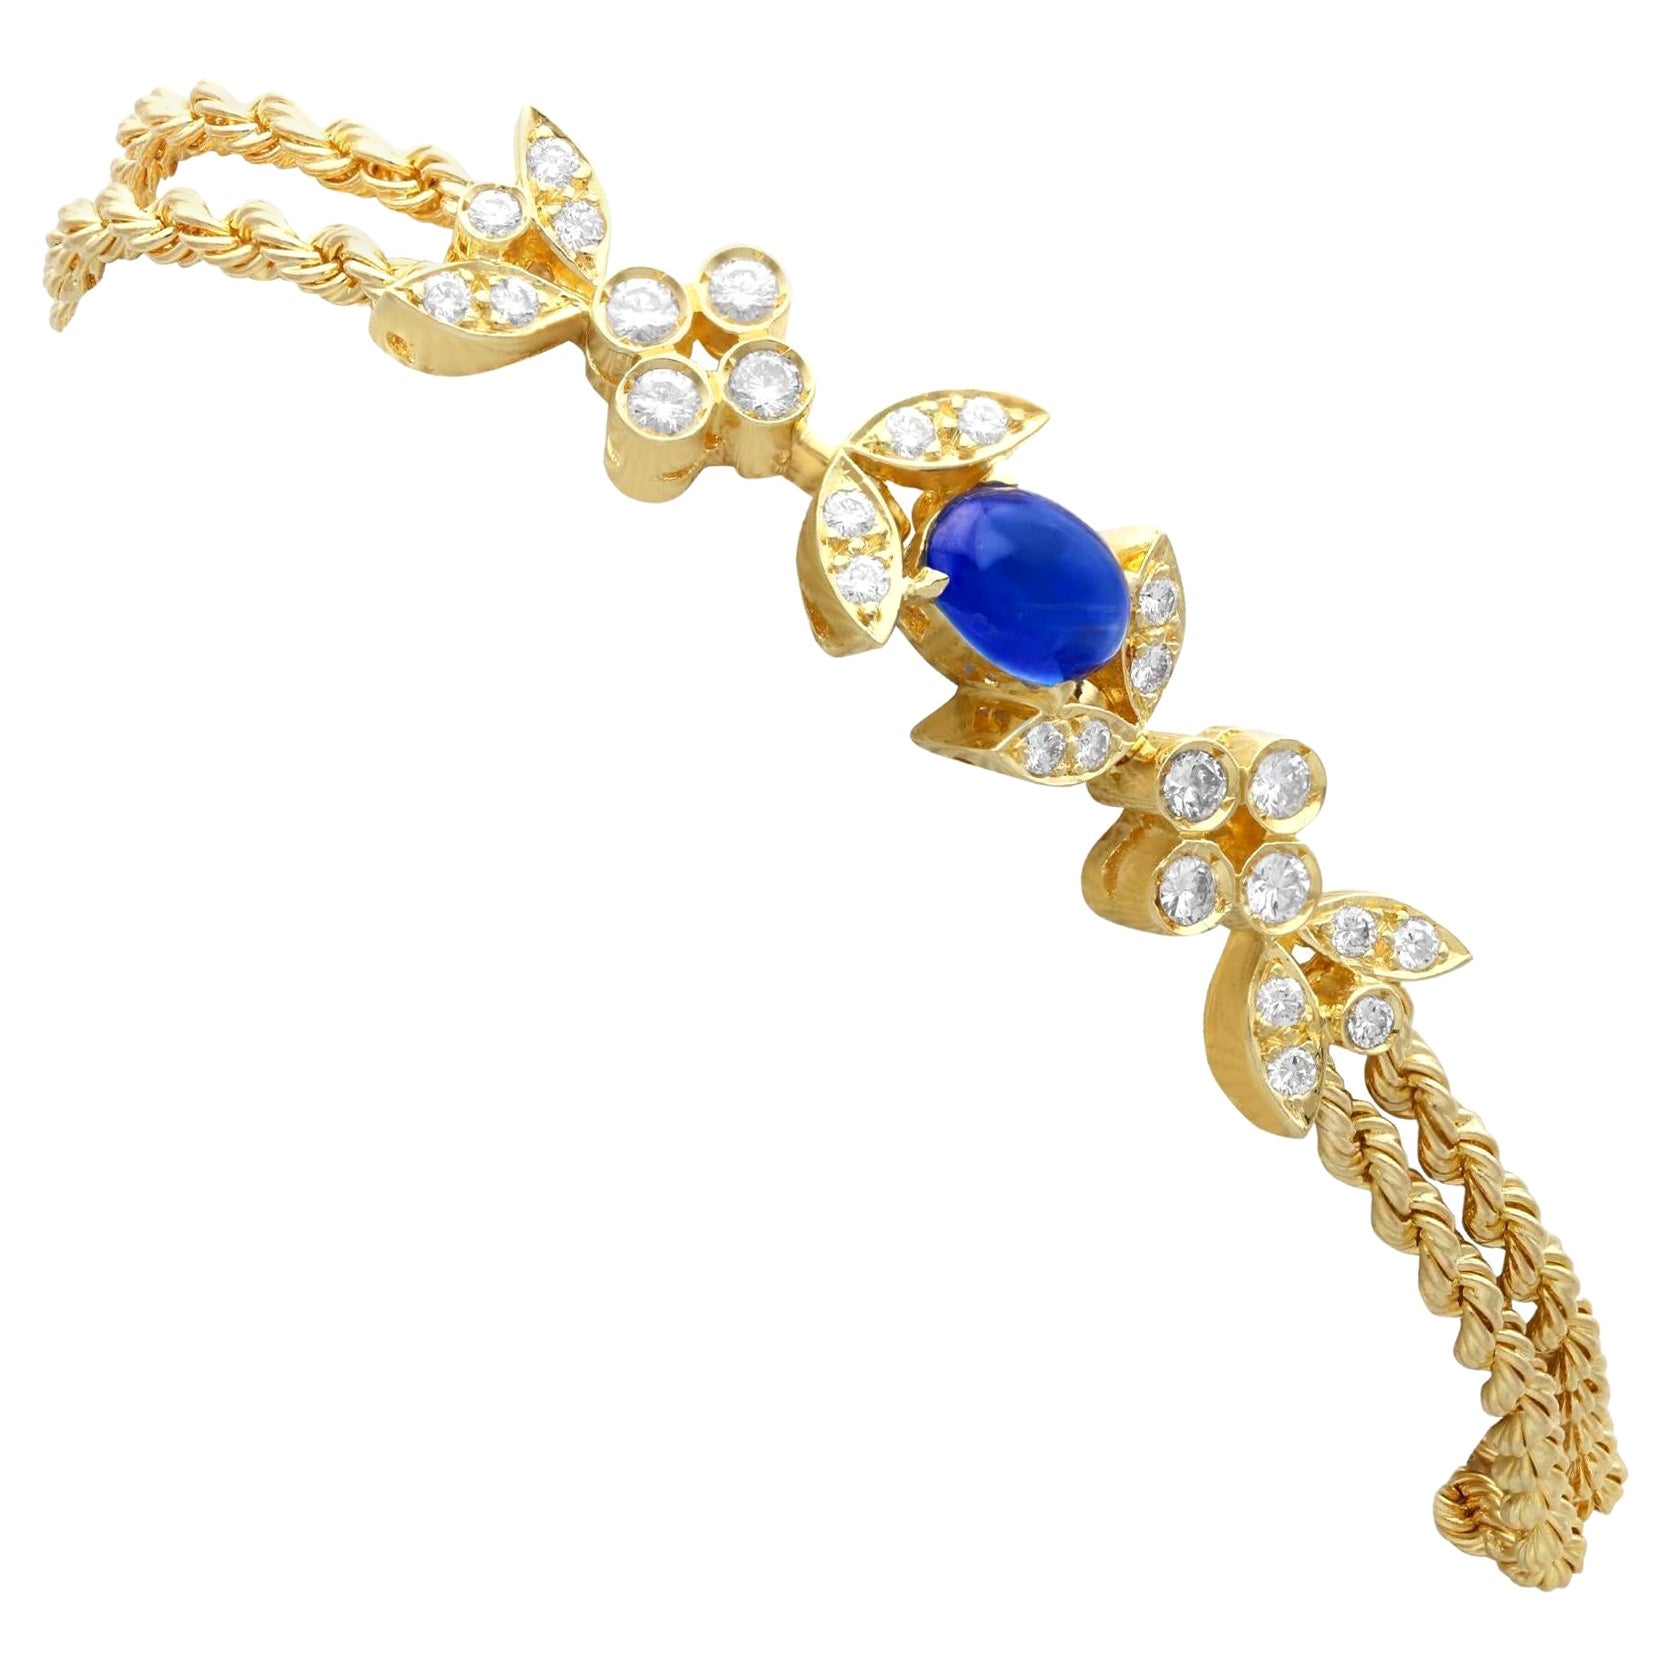 Vintage French 1.30ct Sapphire and Diamond Yellow Gold Bracelet, circa 1940 For Sale